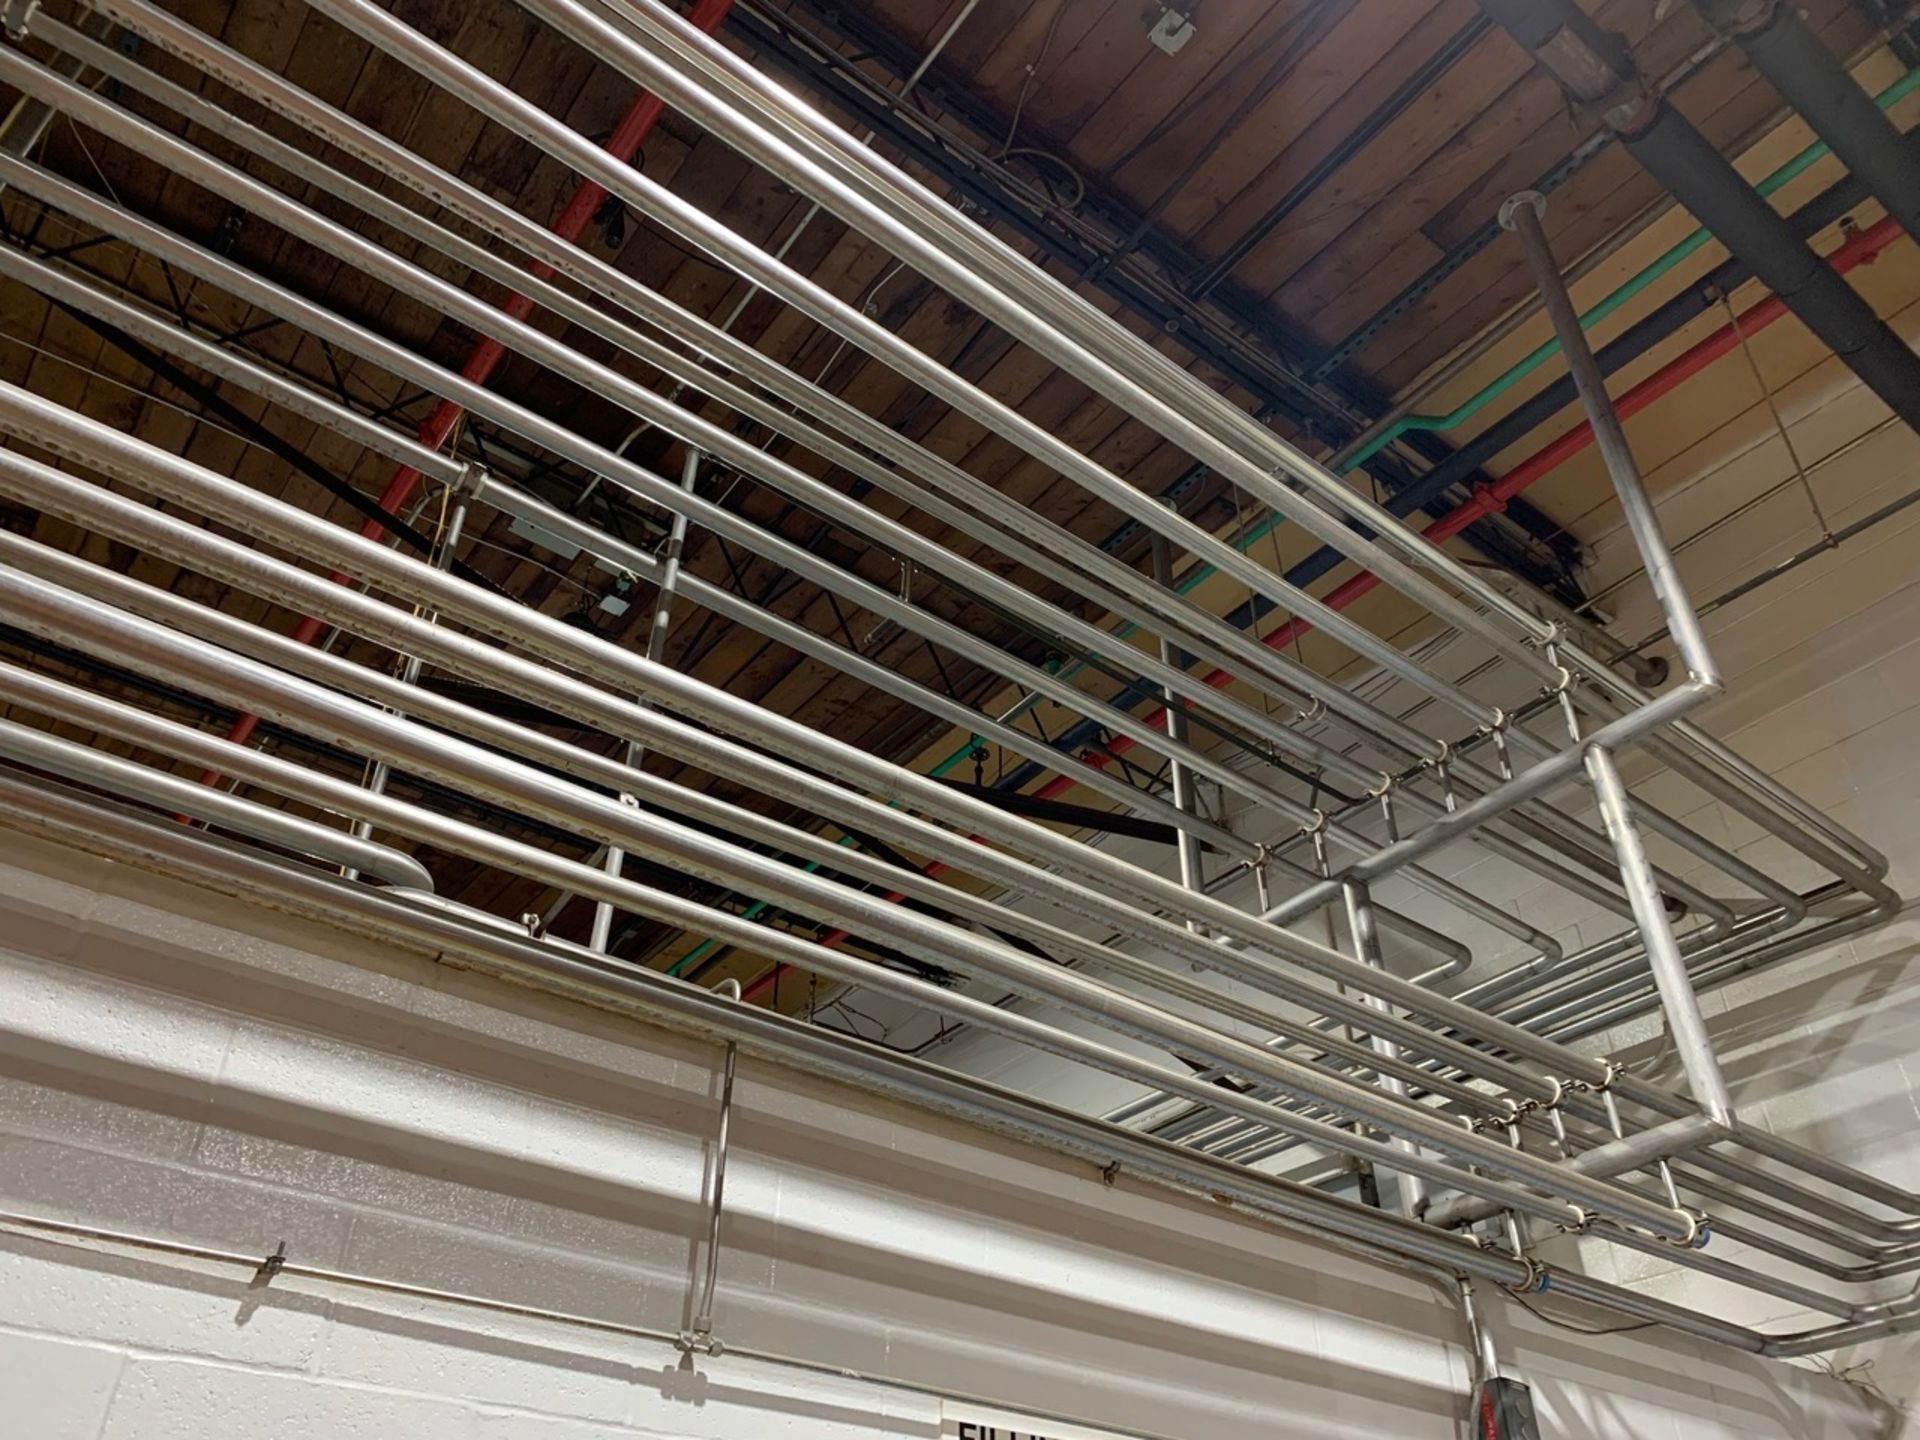 Lot of Stainless Steel Piping in Ceiling - 2 Inch